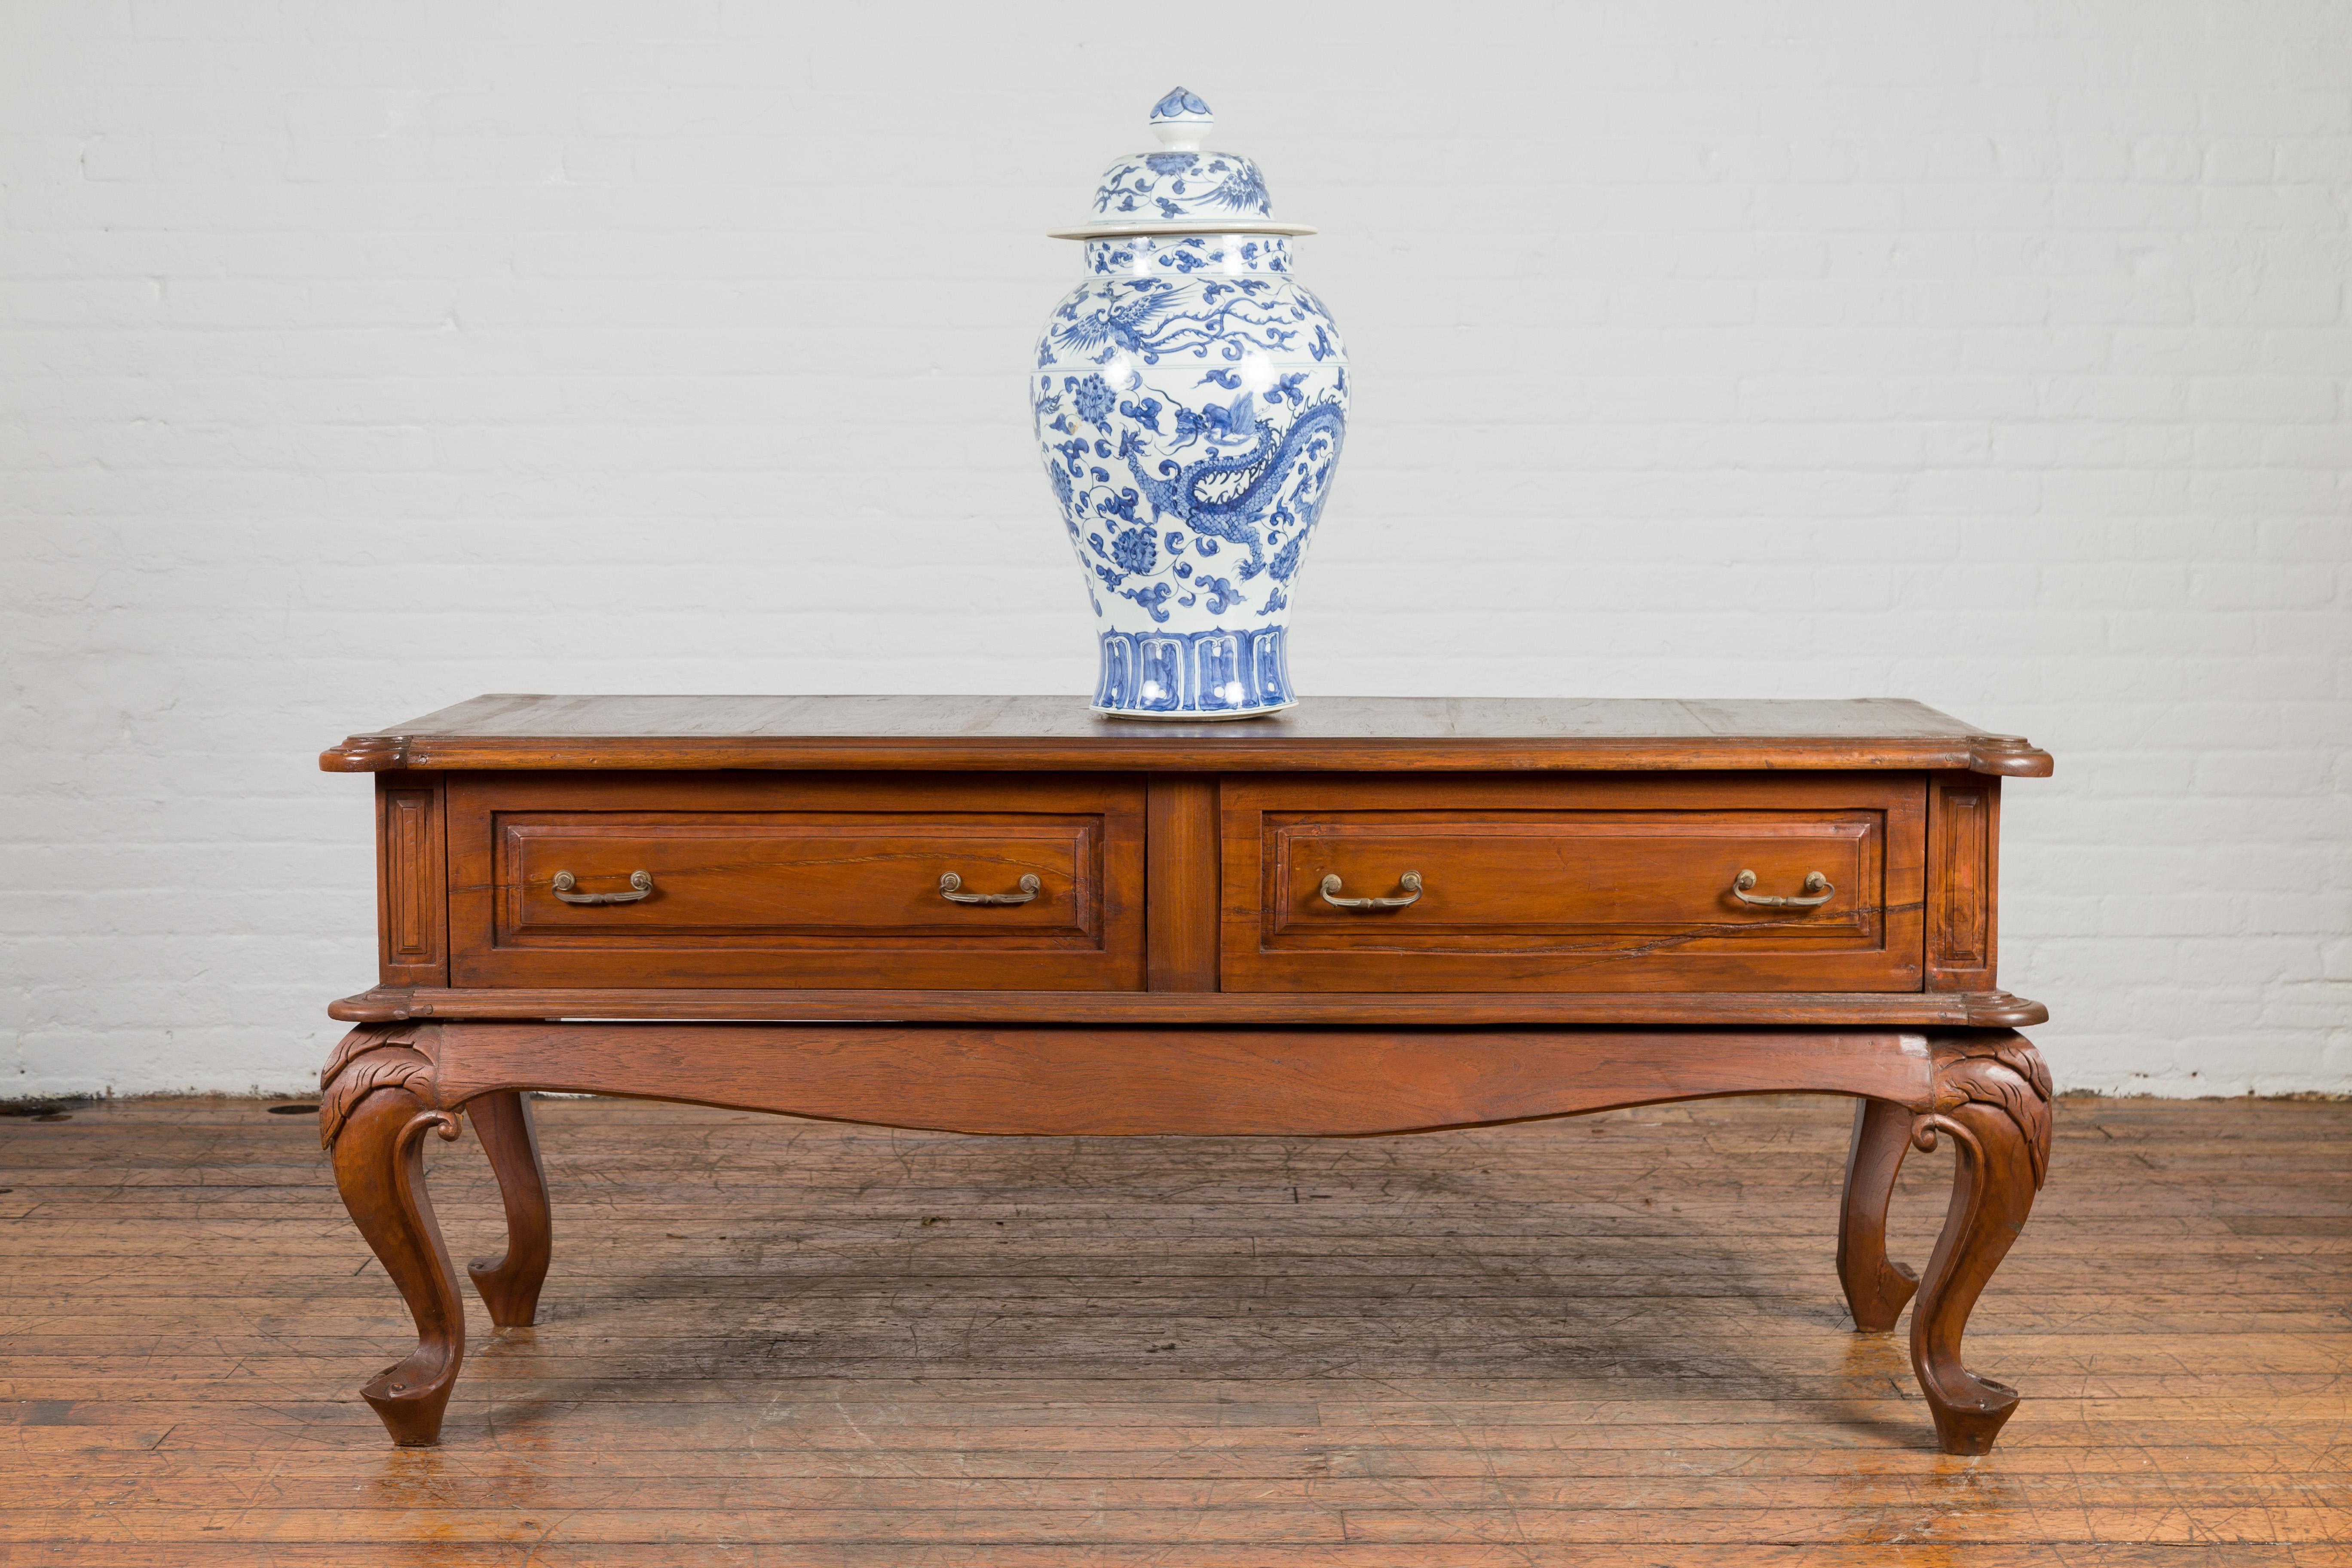 An antique Indonesian Dutch Colonial period low table from the early 20th century, with two drawers and cabriole legs. Created in Indonesia during the early years of the 20th century, this Dutch Colonial low table features a rectangular top with